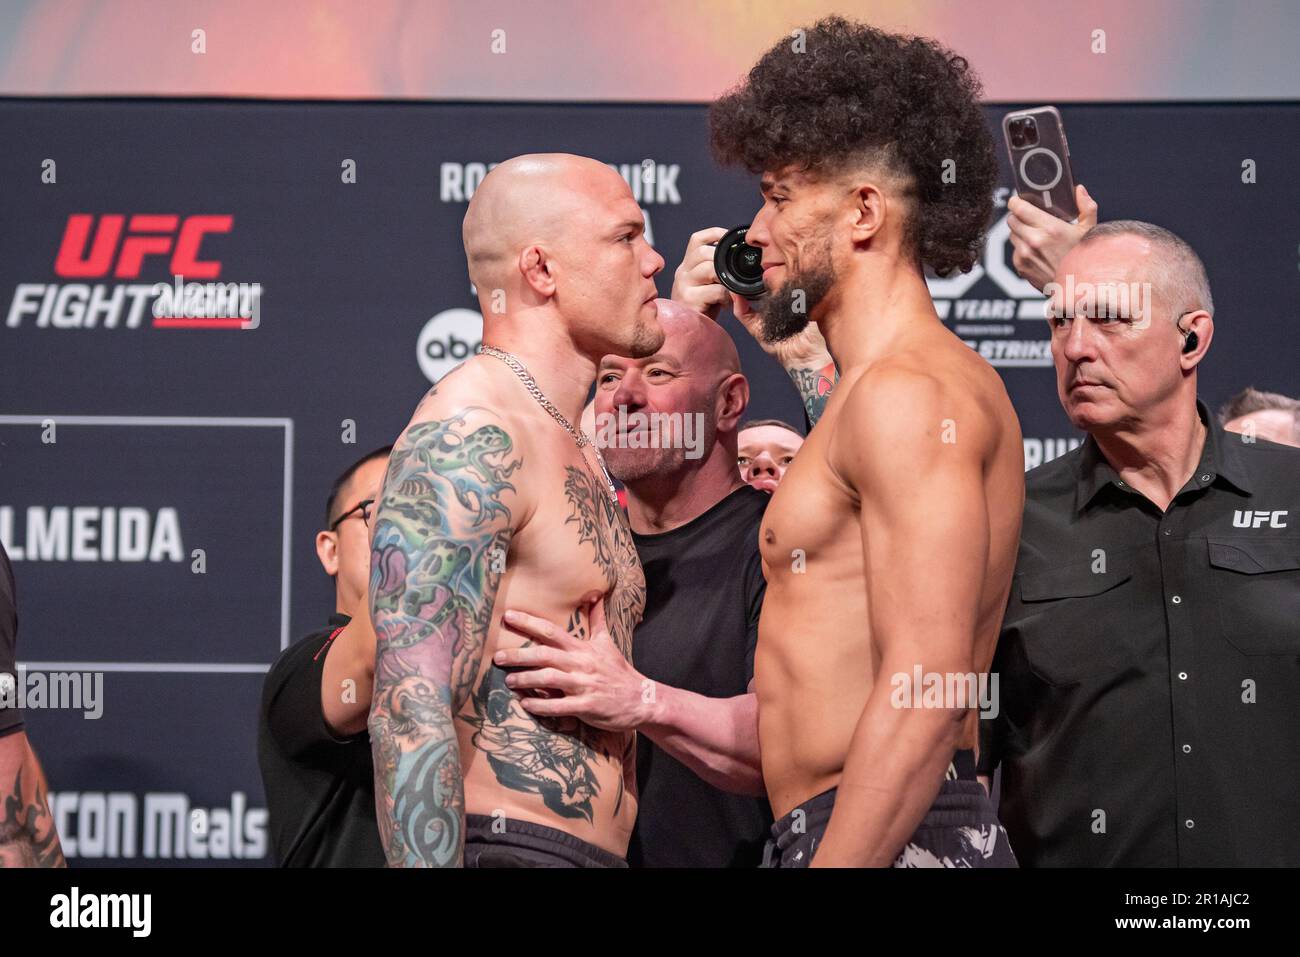 charlotte-nc-north-carolina-usa-12th-may-2023-charlotte-north-carolina-may-12-r-l-anthony-smith-and-johnny-walker-face-off-at-ceremonial-weigh-ins-ahead-of-ufc-fight-night-rozenstruik-vs-almeida-on-may-12th-2023-at-spectrum-center-in-charlotte-north-carolina-united-states-credit-image-matt-daviespx-imagens-via-zuma-press-wire-editorial-usage-only!-not-for-commercial-usage!-2R1AJC2.jpg